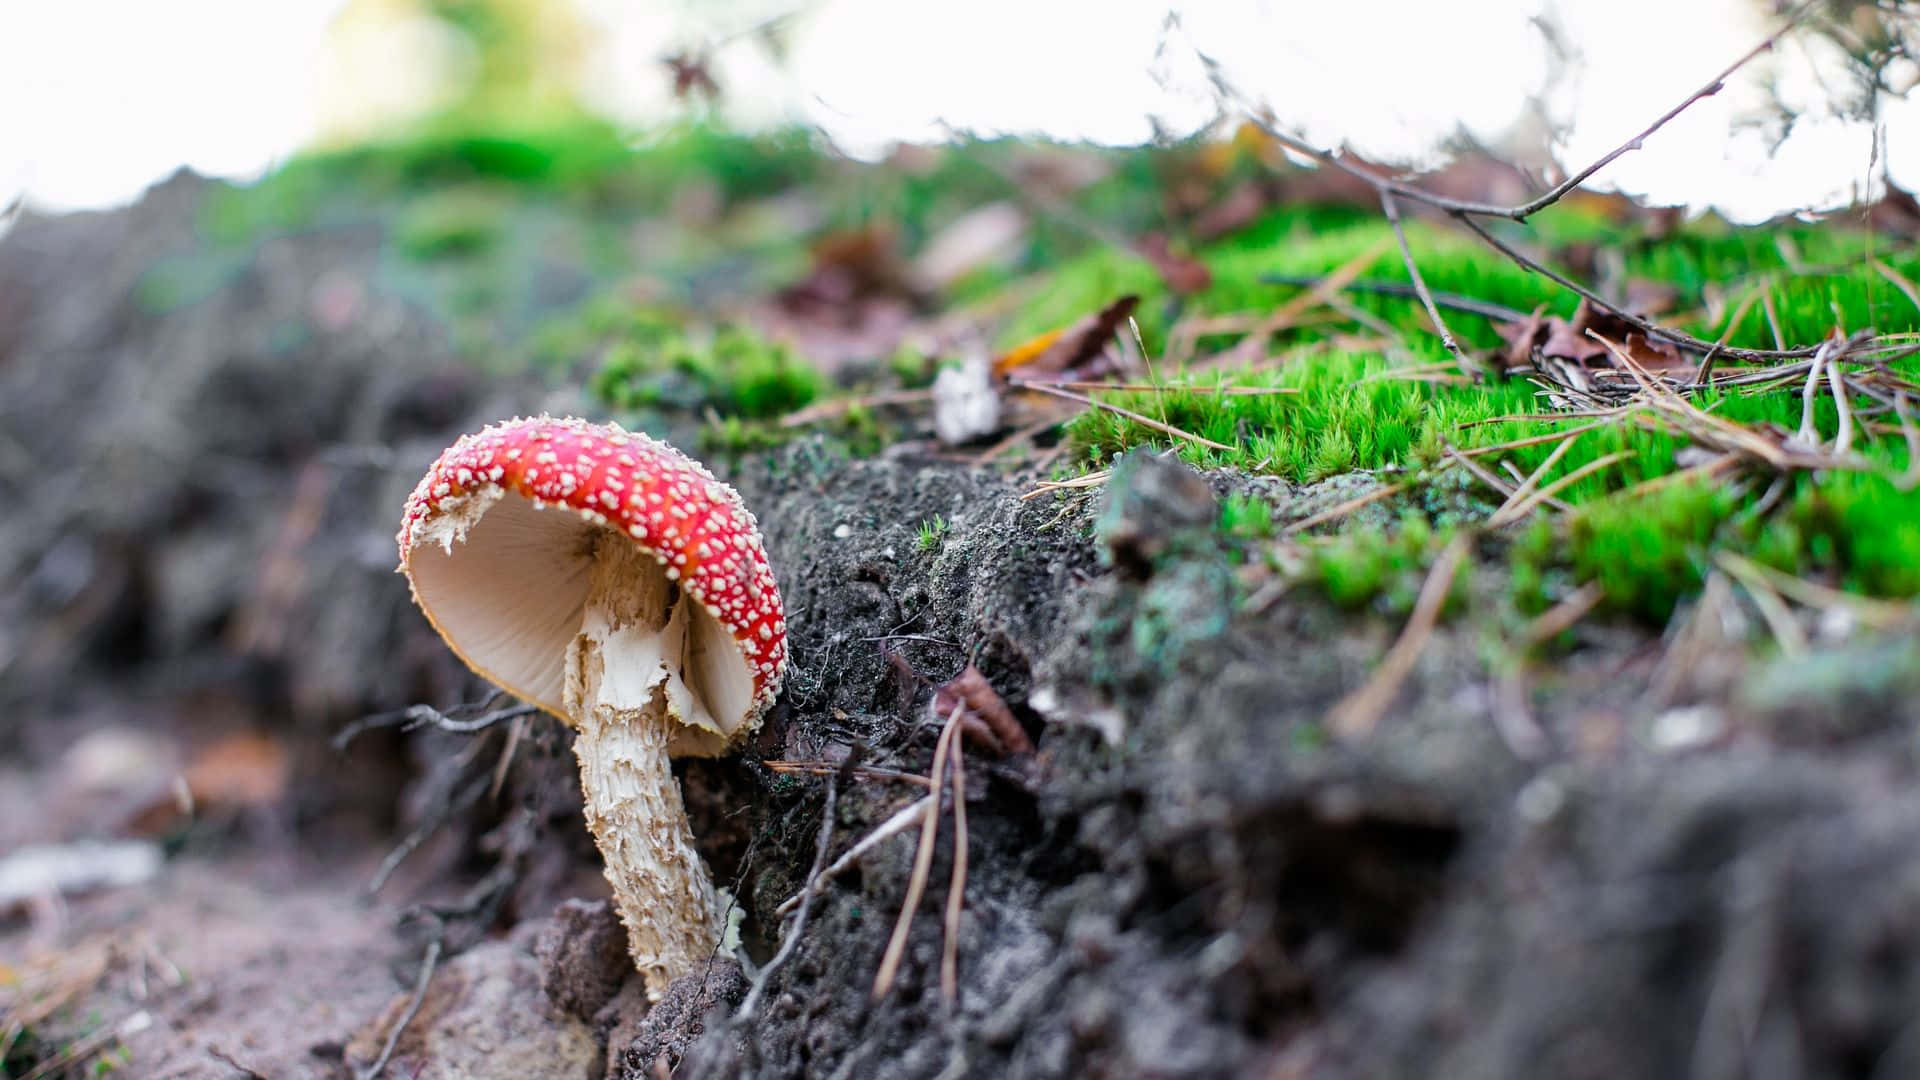 Fly Agaric Fungus On Damp Soil With Moss Background